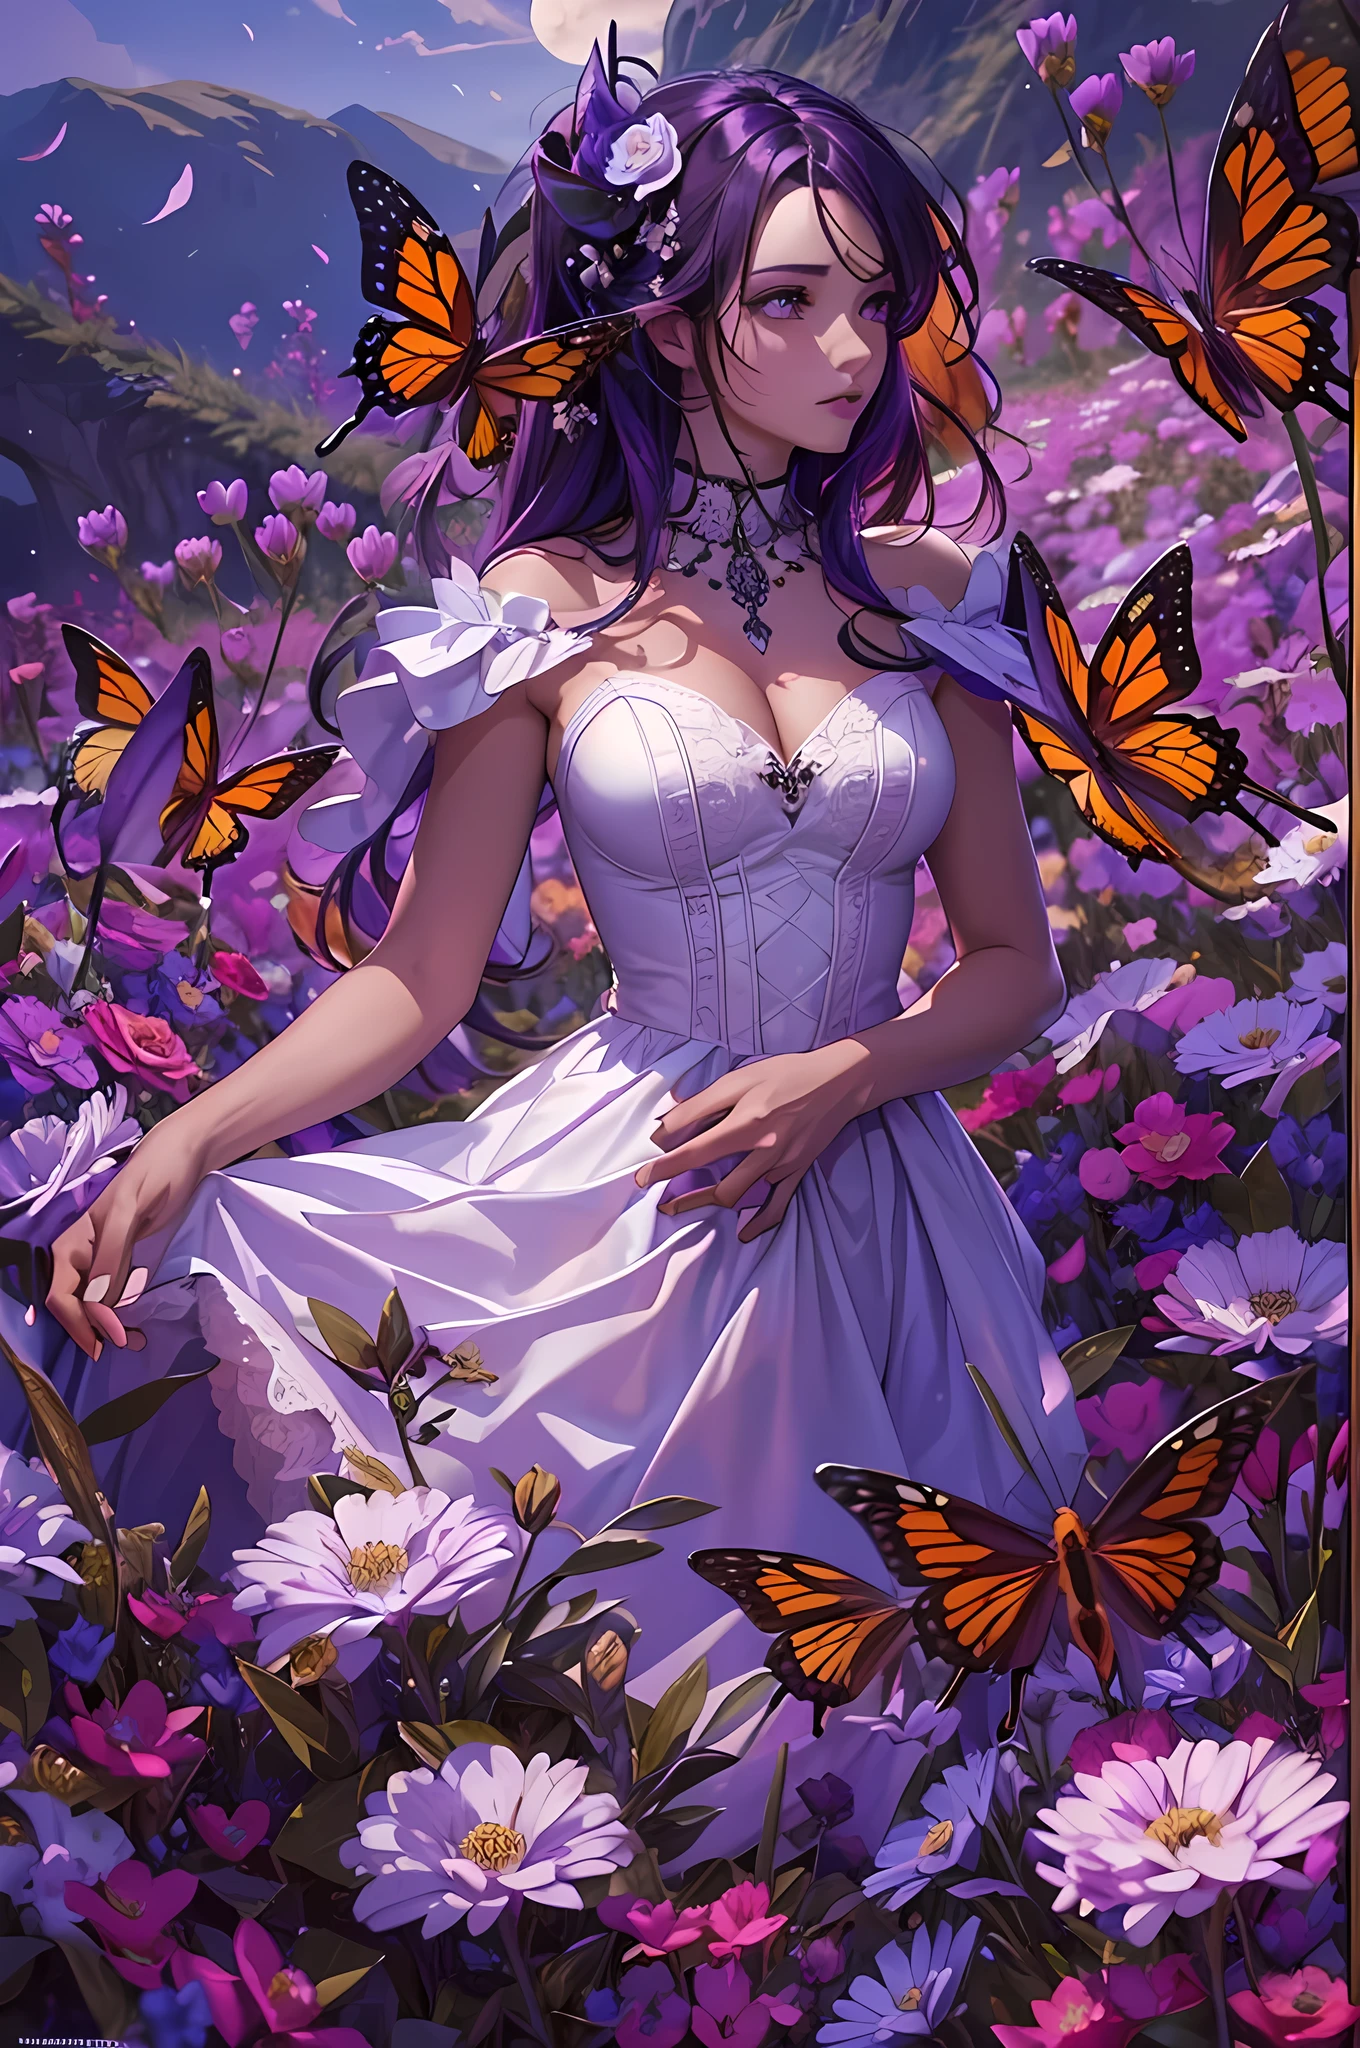 high details, best quality, 16k, RAW, [best detailed], masterpiece, best quality, (extremely detailed), full body, ultra wide shot, photorealistic, dark fantasy art, goth art, RPG art, D&D art, a picture of a dark female fairy resting in a flower meadow, extremely beautiful fairy, ultra feminine (intense details, Masterpiece, best quality), best detailed face (intense details, Masterpiece, best quality), having wide butterfly wings butterfly_wings, spread butterfly wings (intense details, Masterpiece, best quality: 1.3), (purple: 1.5) colors wings (intense details, Masterpiece, best quality), (dark red) hair, long hair, shinning hair, flowing hair, shy smile, innocent smile, (blue: 1.3) eyes, dark blue lips, wearing (white: 1.3) dress latex corset (intense details, Masterpiece, best quality), dynamic elegant shirt, chocker, wearing (red: 1.3) high heels, in various shades of red colored flower meadow (intense details, Masterpiece, best quality), (red flowers: 1.2) , (black flowers: 1.2), (white flowers: 1.2), (blue flowers: 1.3) [extreme many flowers] (intense details, Masterpiece, best quality), dark colorful flowers (intense details, Masterpiece, best quality), flower meadow in a dark goth field background, night time, moon rising, dim light, cinematic light, High Detail, Ultra High Quality, High Resolution, 16K Resolution, Ultra HD Pictures, 3D rendering Ultra Realistic, Clear Details, Realistic Detail, Ultra High Definition, #chinese cloth, dungeons and dragons, DonMDr4g0nXL